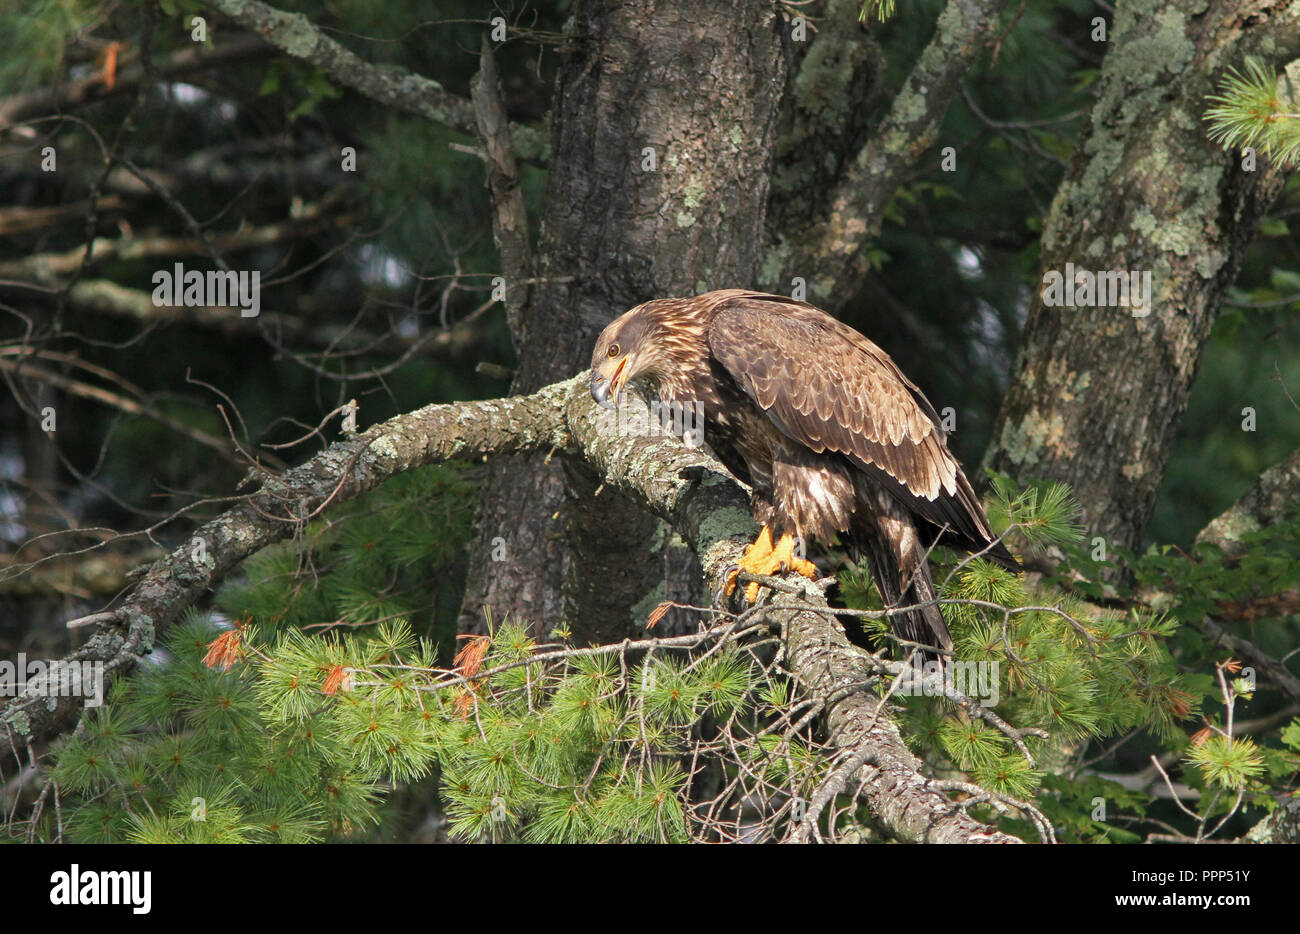 Juvenile Bald Eagle Perched in Pine Tree Stock Photo